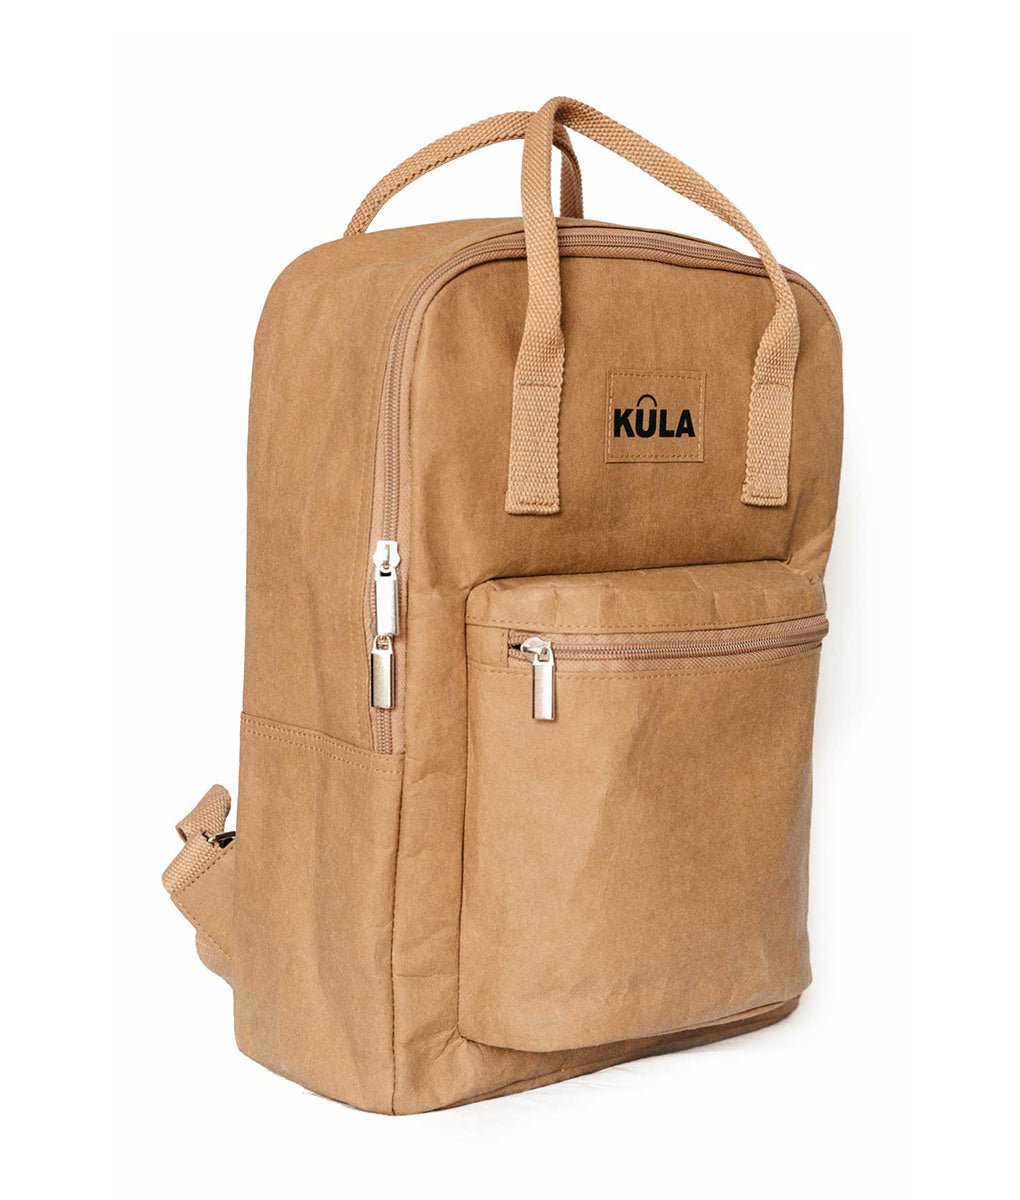 Kula Bags - The Story Behind our Vegan Bags and Backpacks